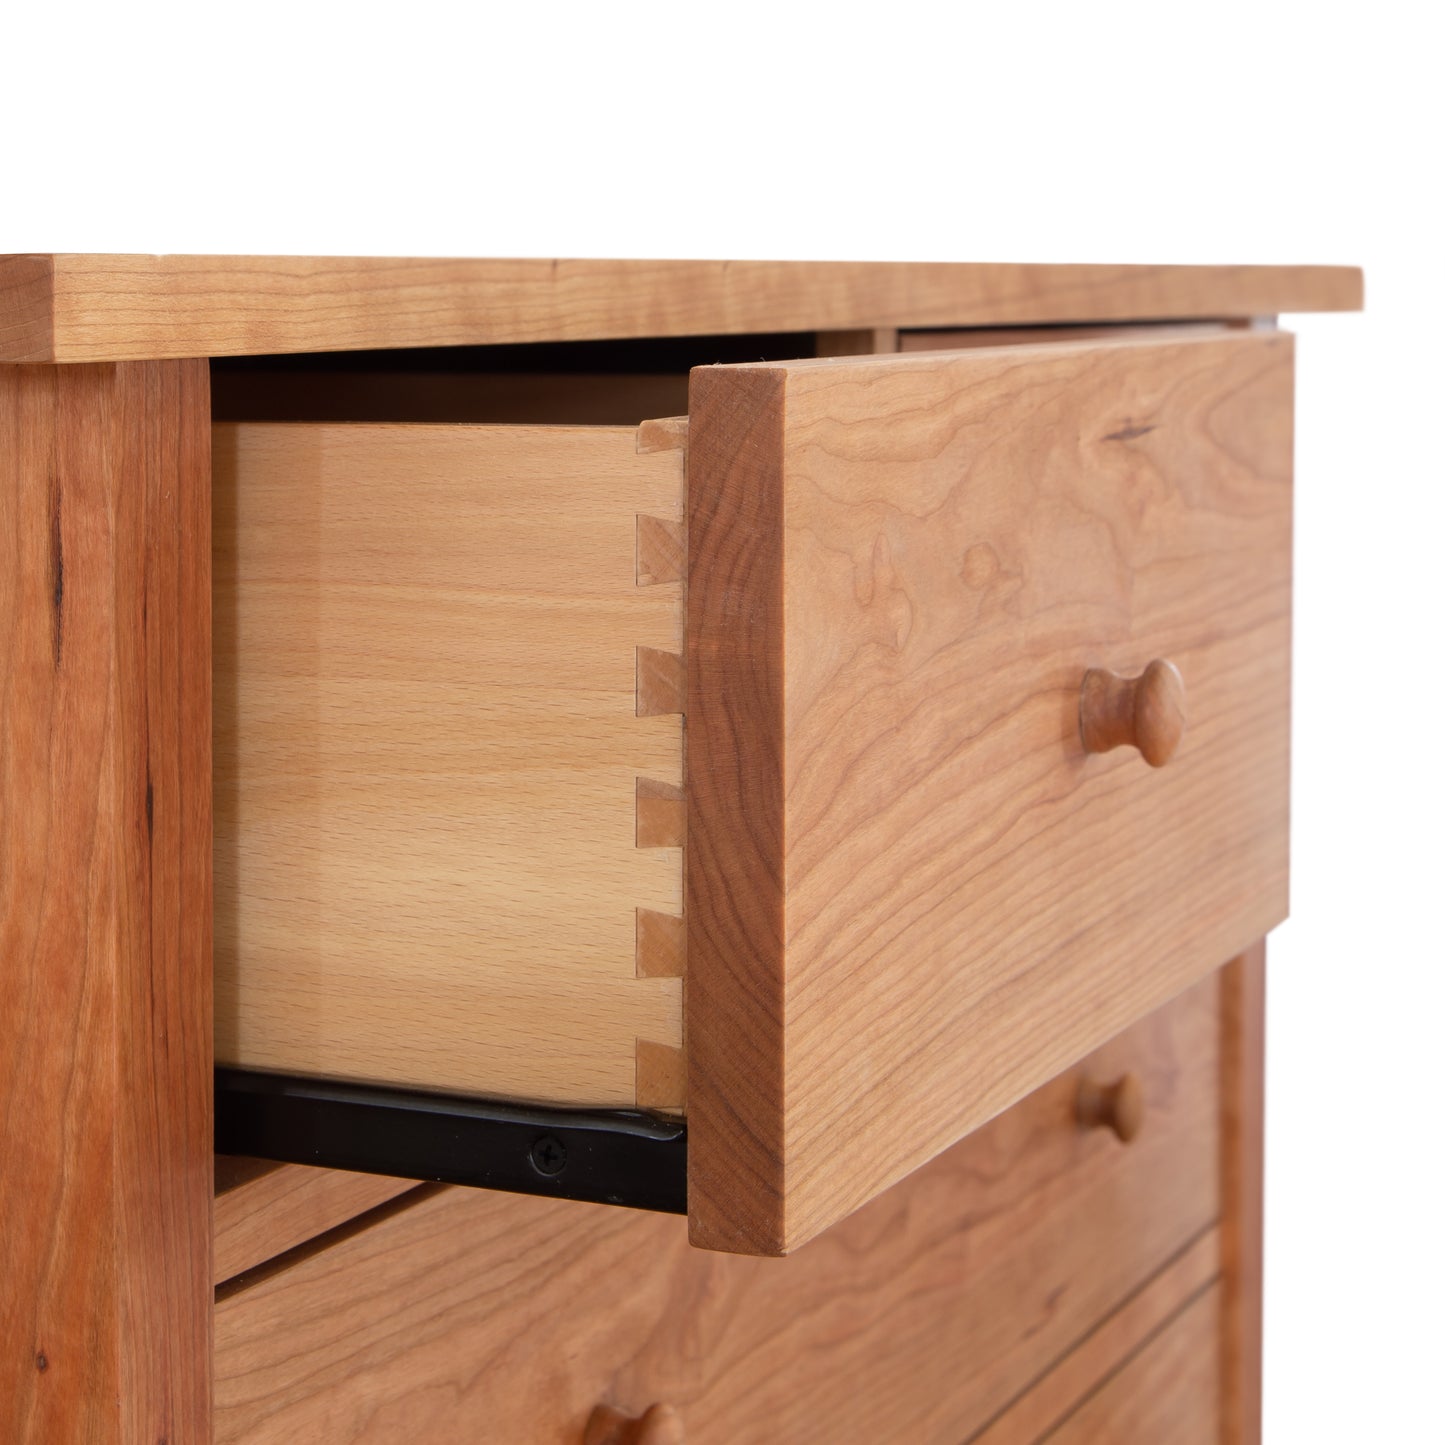 A solid wood dresser with a drawer, similar to the Vermont Furniture Designs Burlington Shaker 7-Drawer Chest.